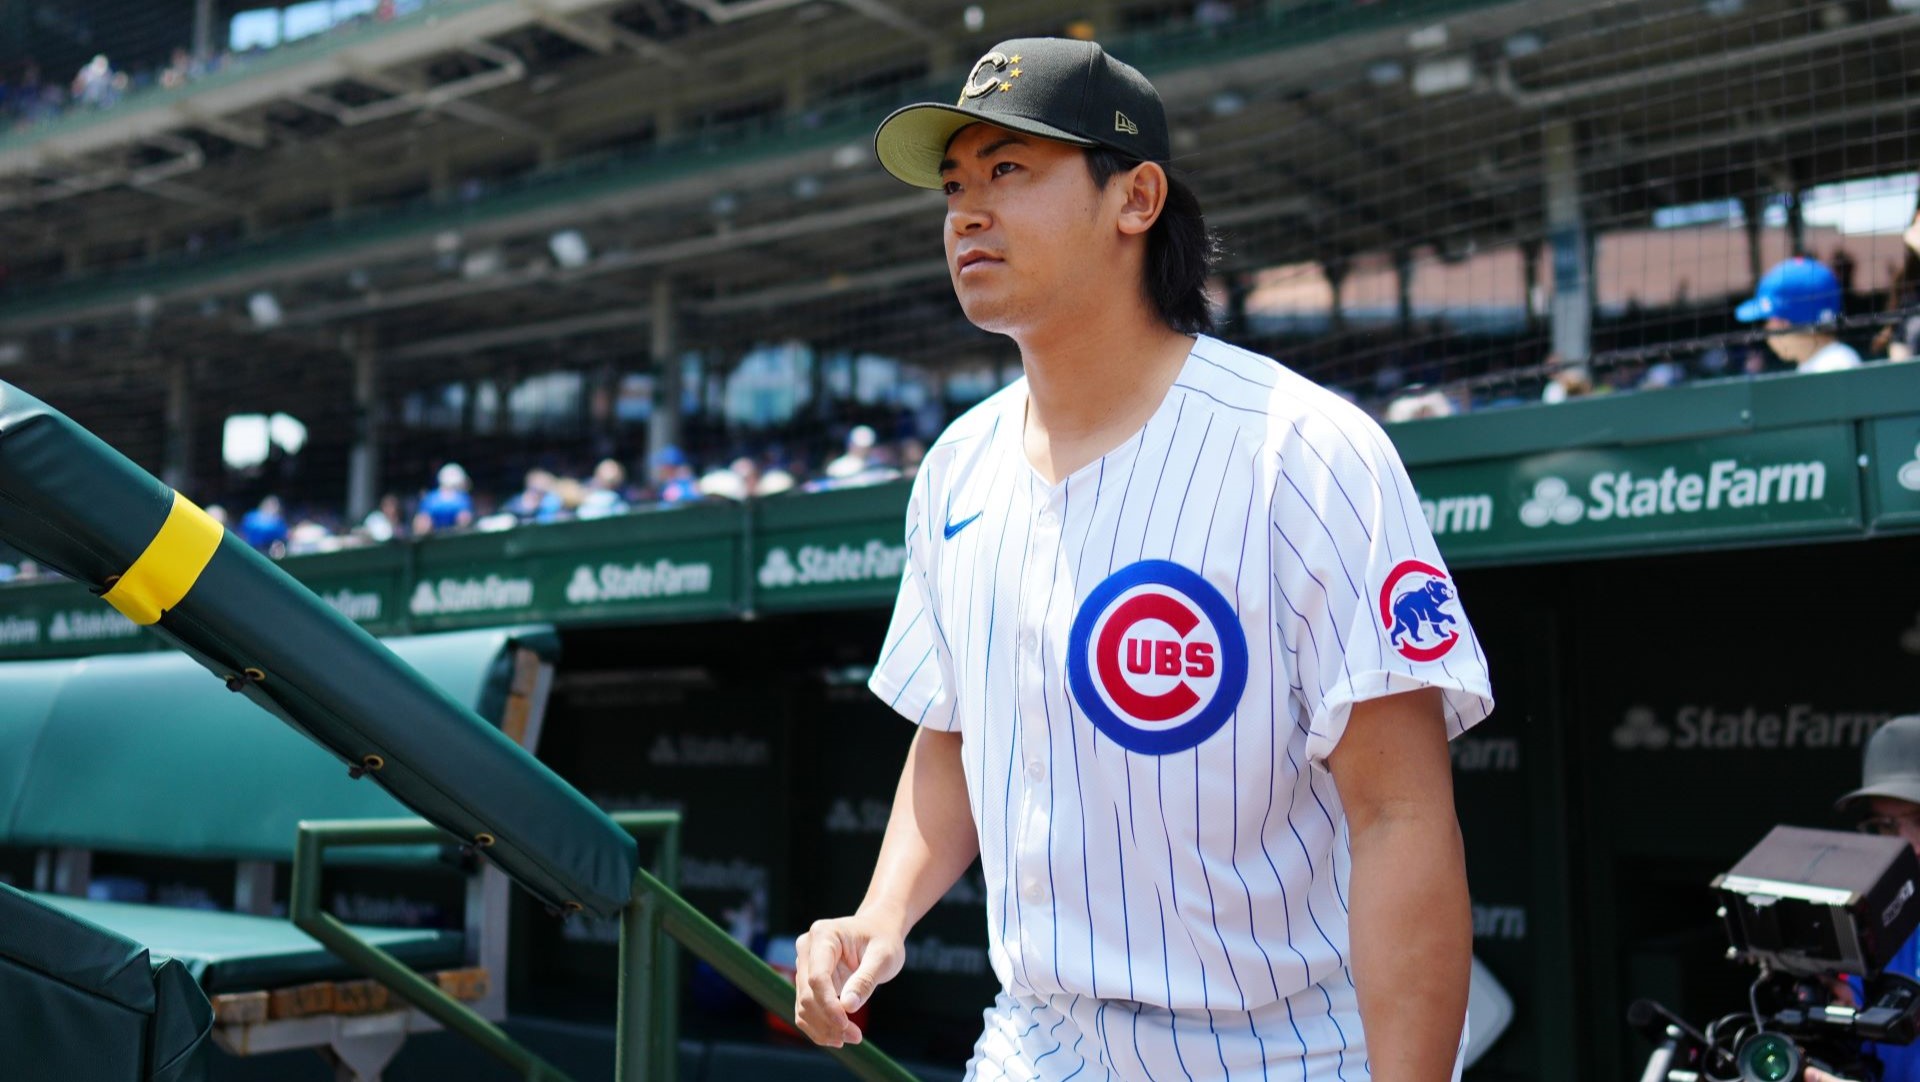 Shota Imanaga #18 of the Chicago Cubs looks on from the dugout prior to the game between the Pittsburgh Pirates and the Chicago Cubs.